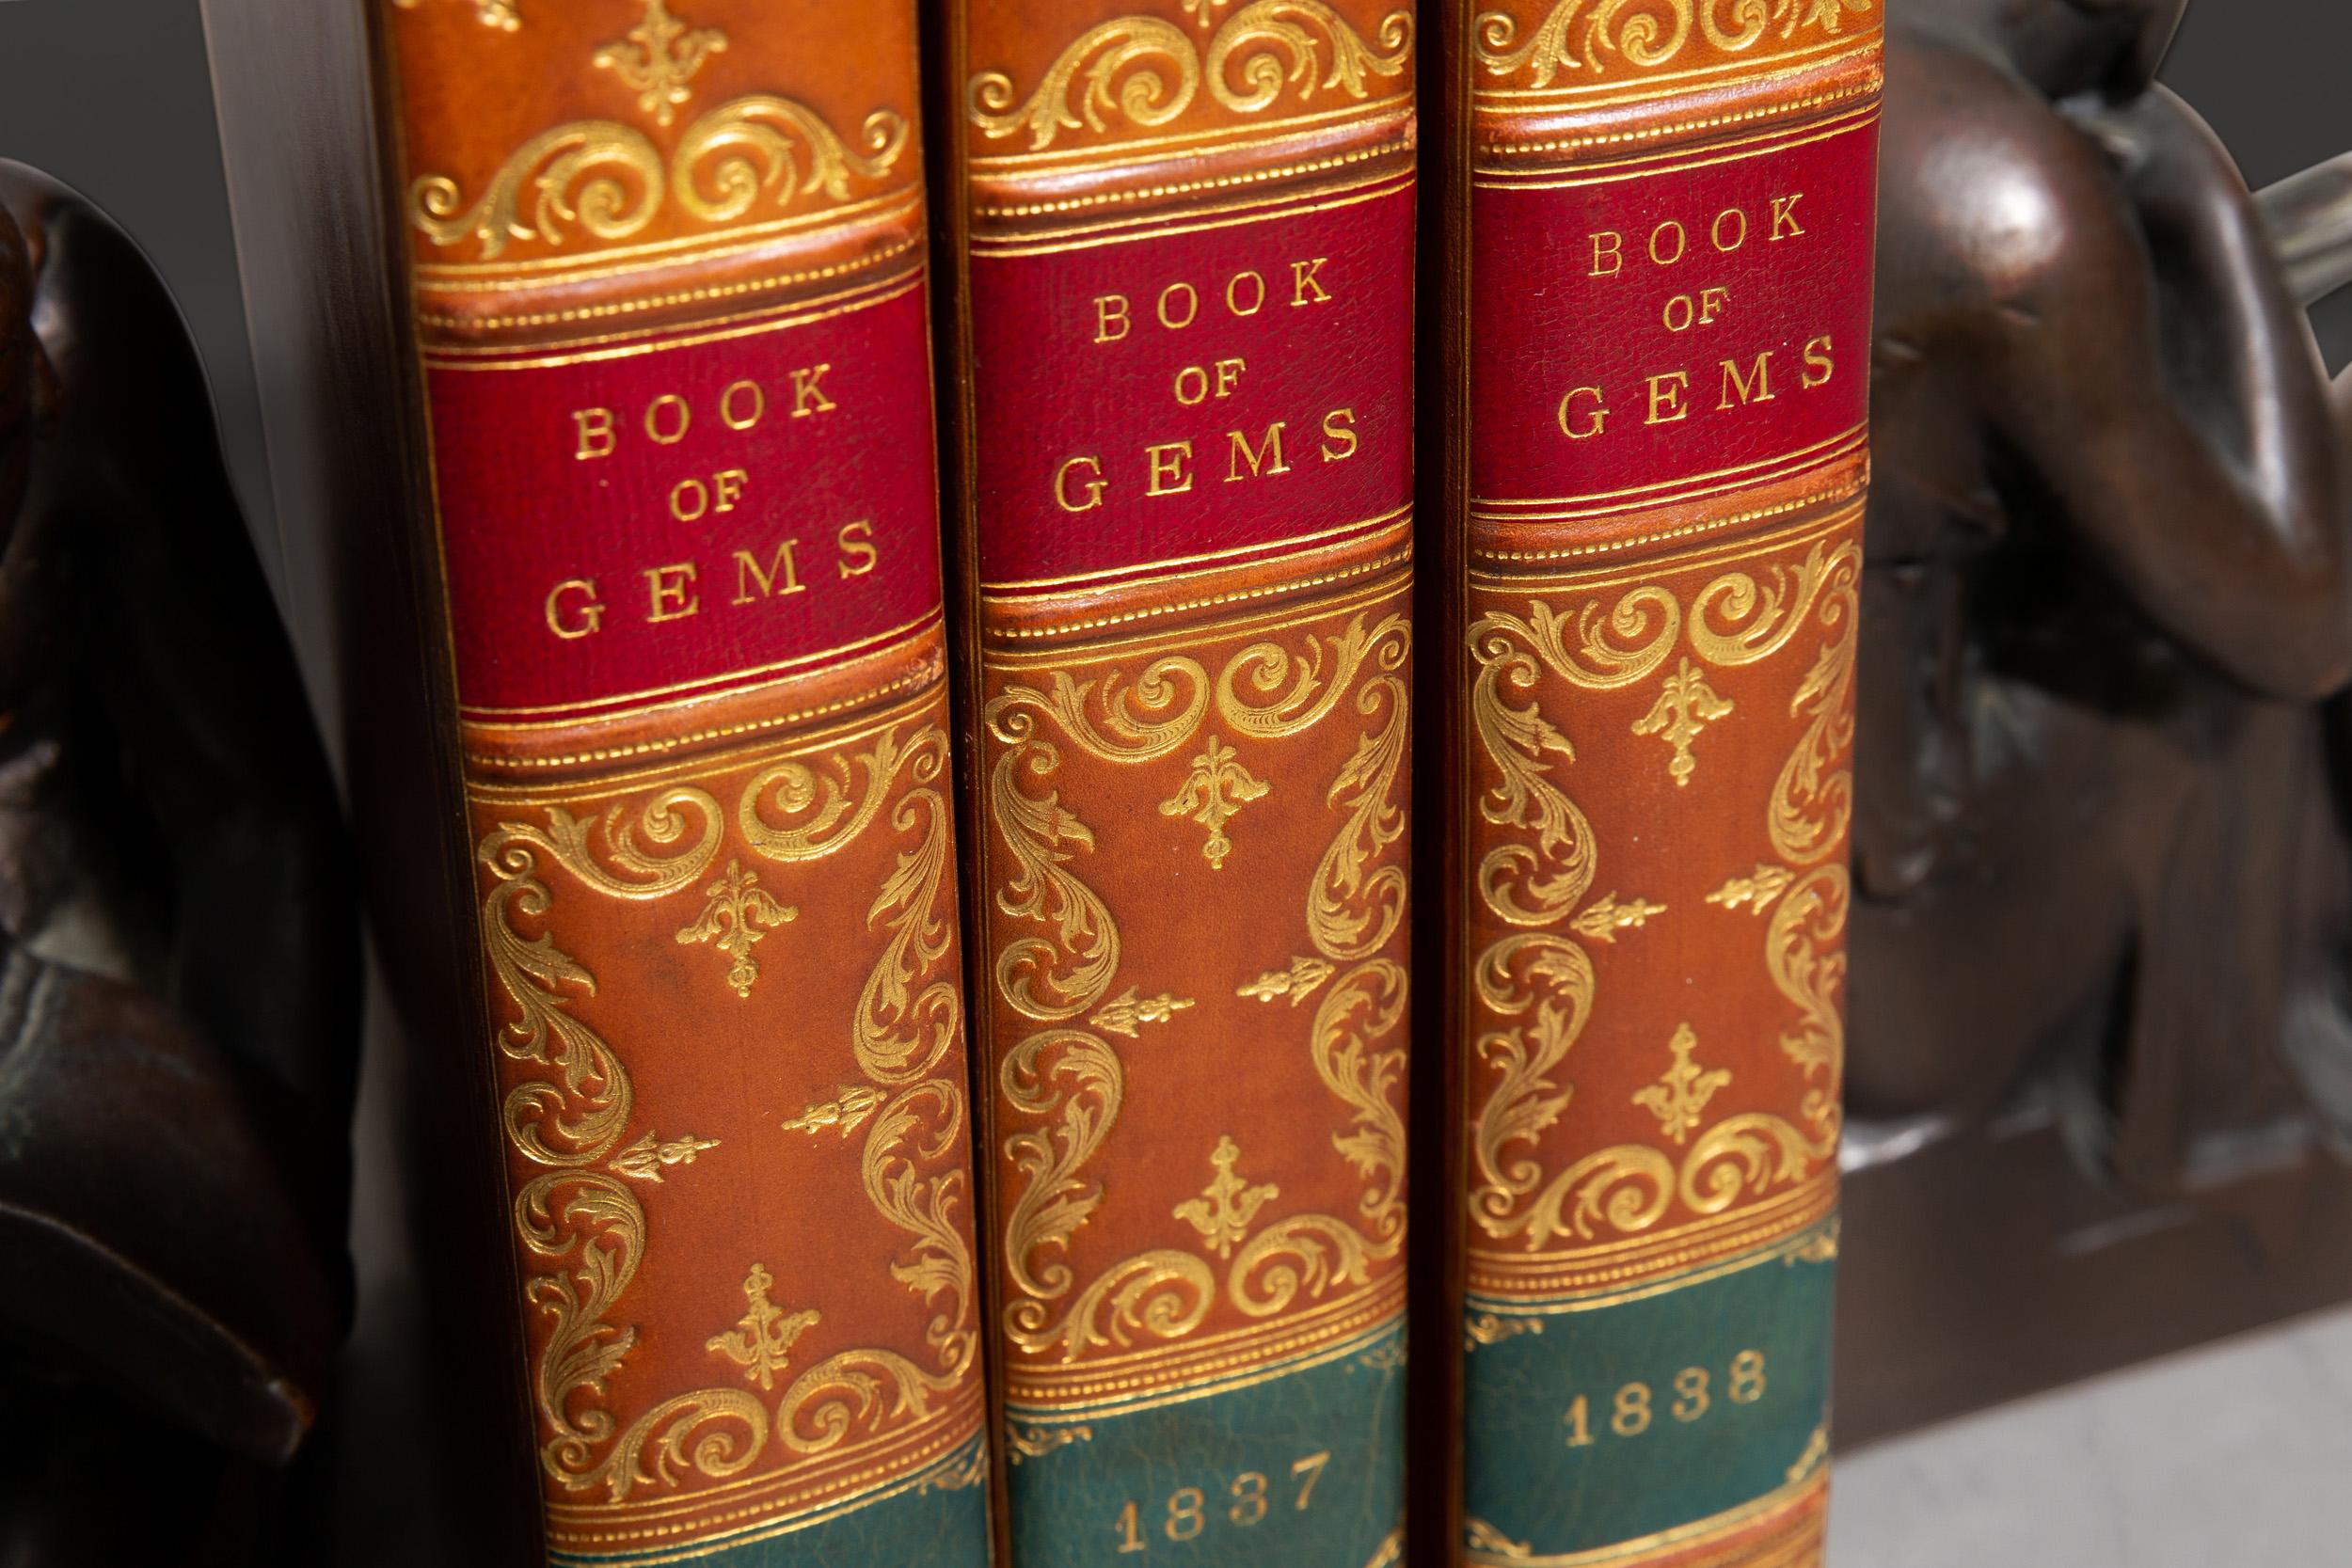 3 Volumes. S. C. Hall. The Book of Gems: Poets and Artists of Great Britain. Bound in full tan polished calf by Zaehnsdorf. All edges gilt, raised bands, ornate gilt on spines, marbled endpapers, red & green labels. Illustrated.
Published: London: